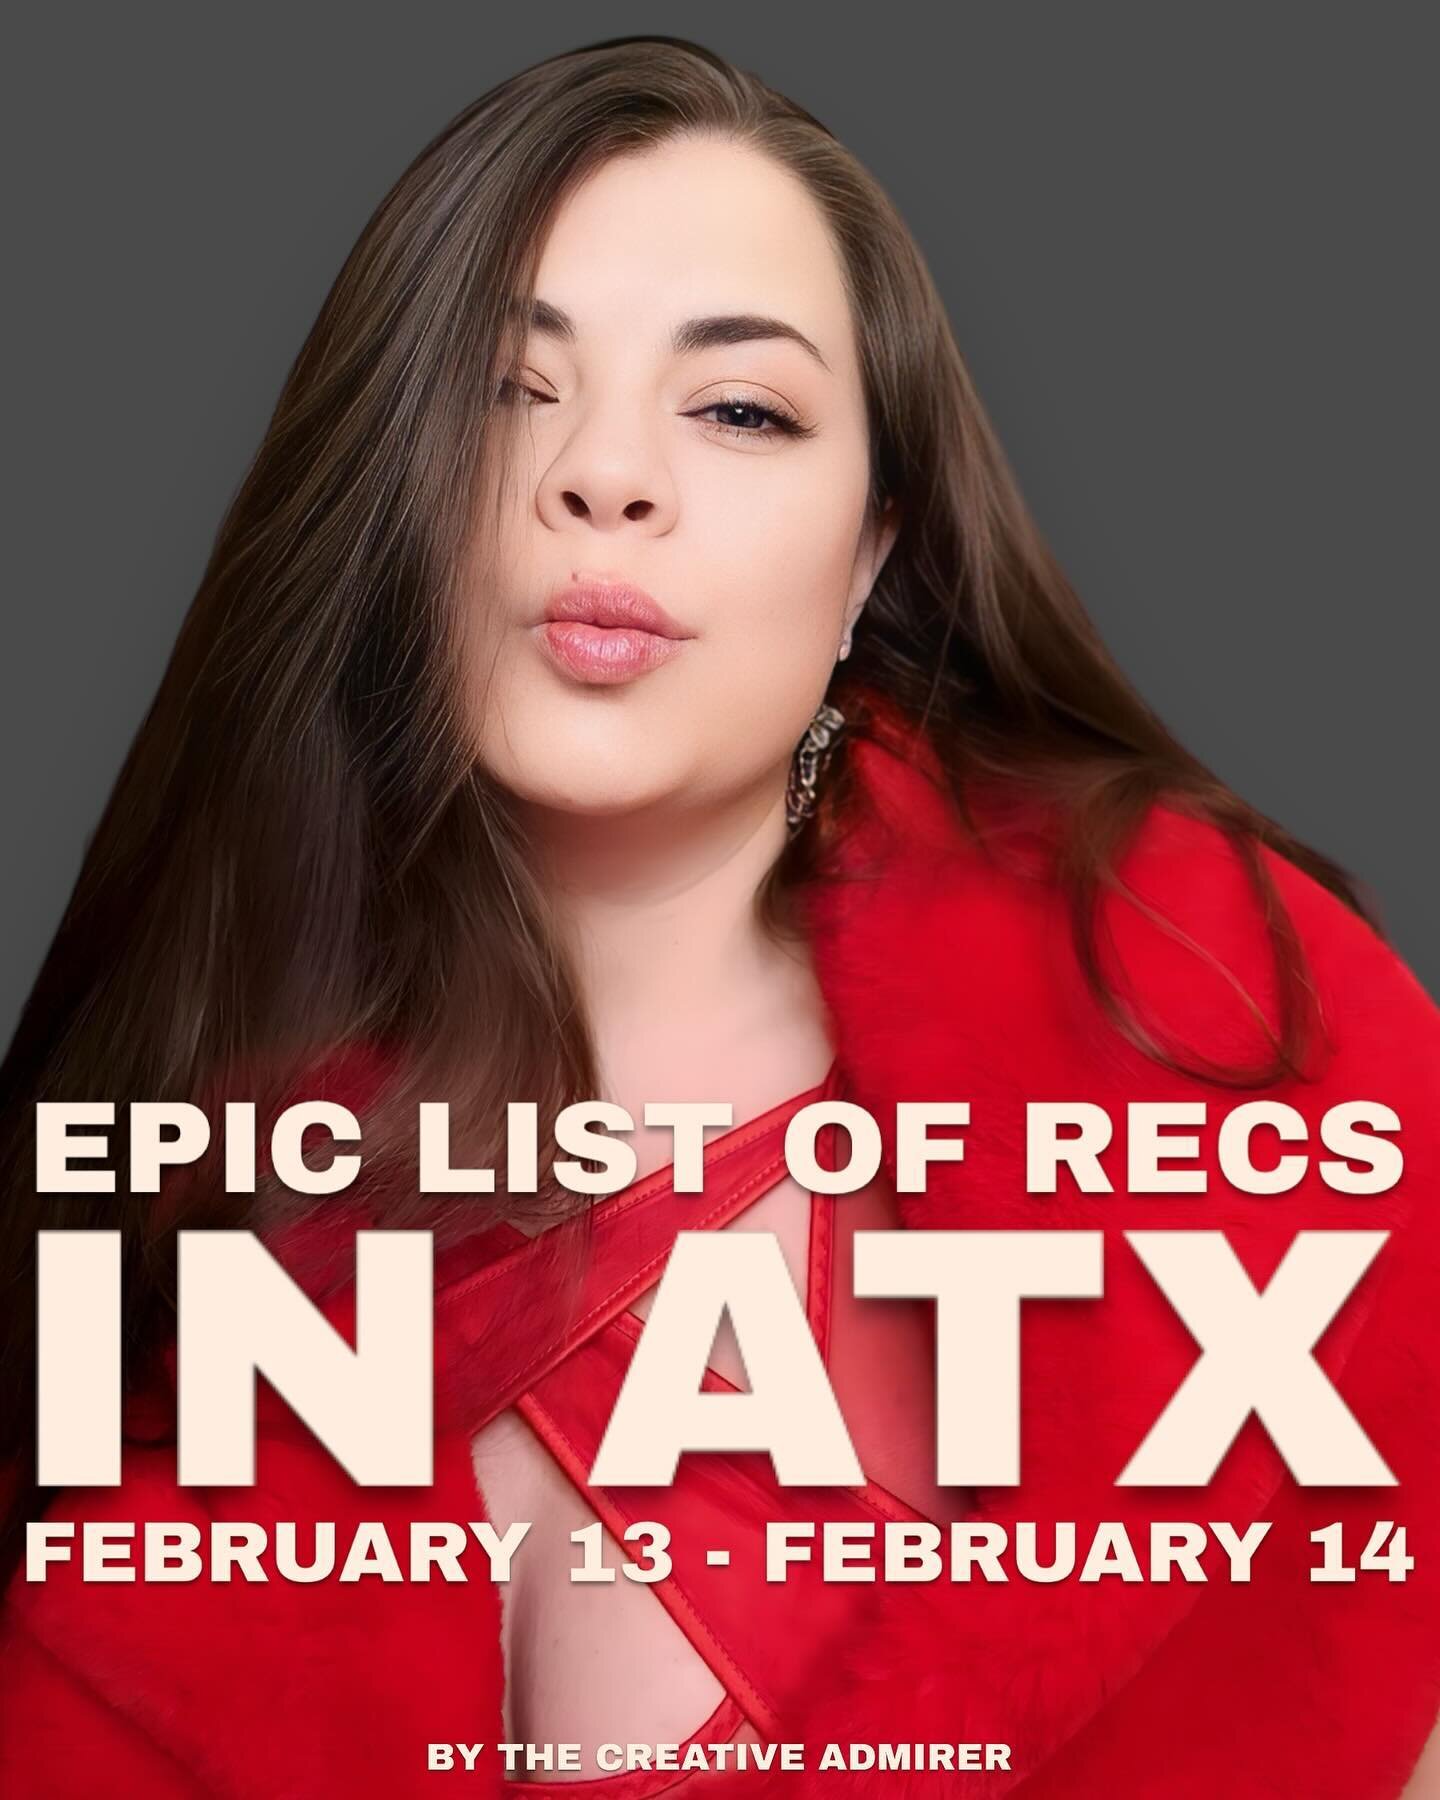 EPIC LIST OF ATX RECS 🙌 Tuesday, February 13 - Wednesday, February 14
&nbsp;
🌹I couldn&rsquo;t resist curating a Valentine&rsquo;s / Galentine&rsquo;s list of recommendations to check out, so here it is! Lots of que romantico fun the next two days 